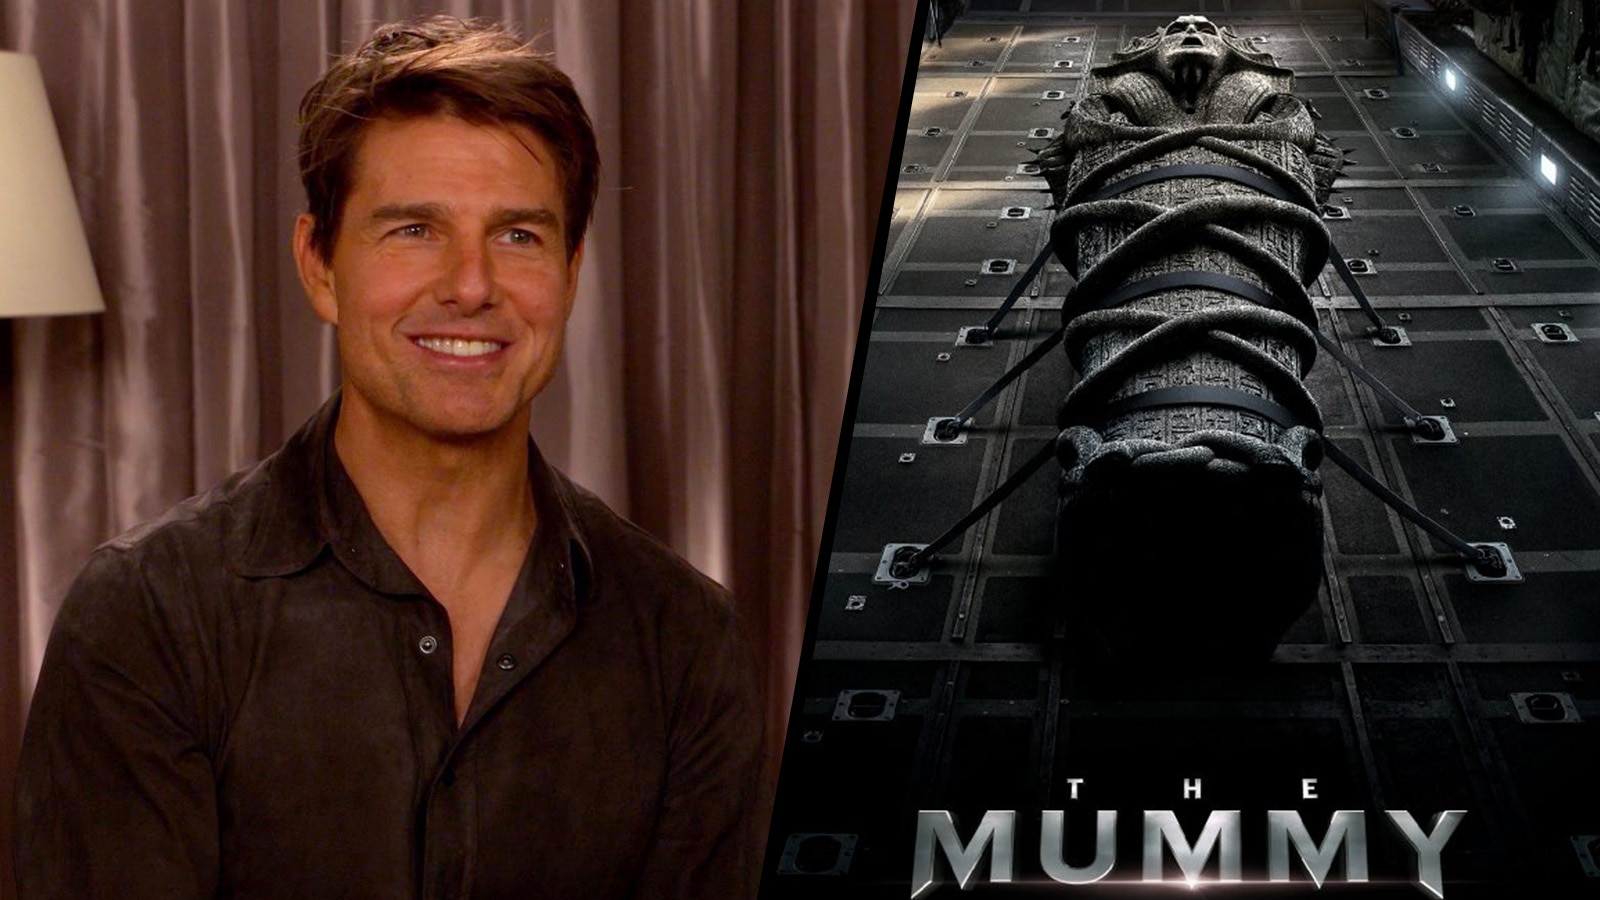 Watch Access Hollywood Interview The Mummy Tom Cruise On His Intense Training For The Film 8738